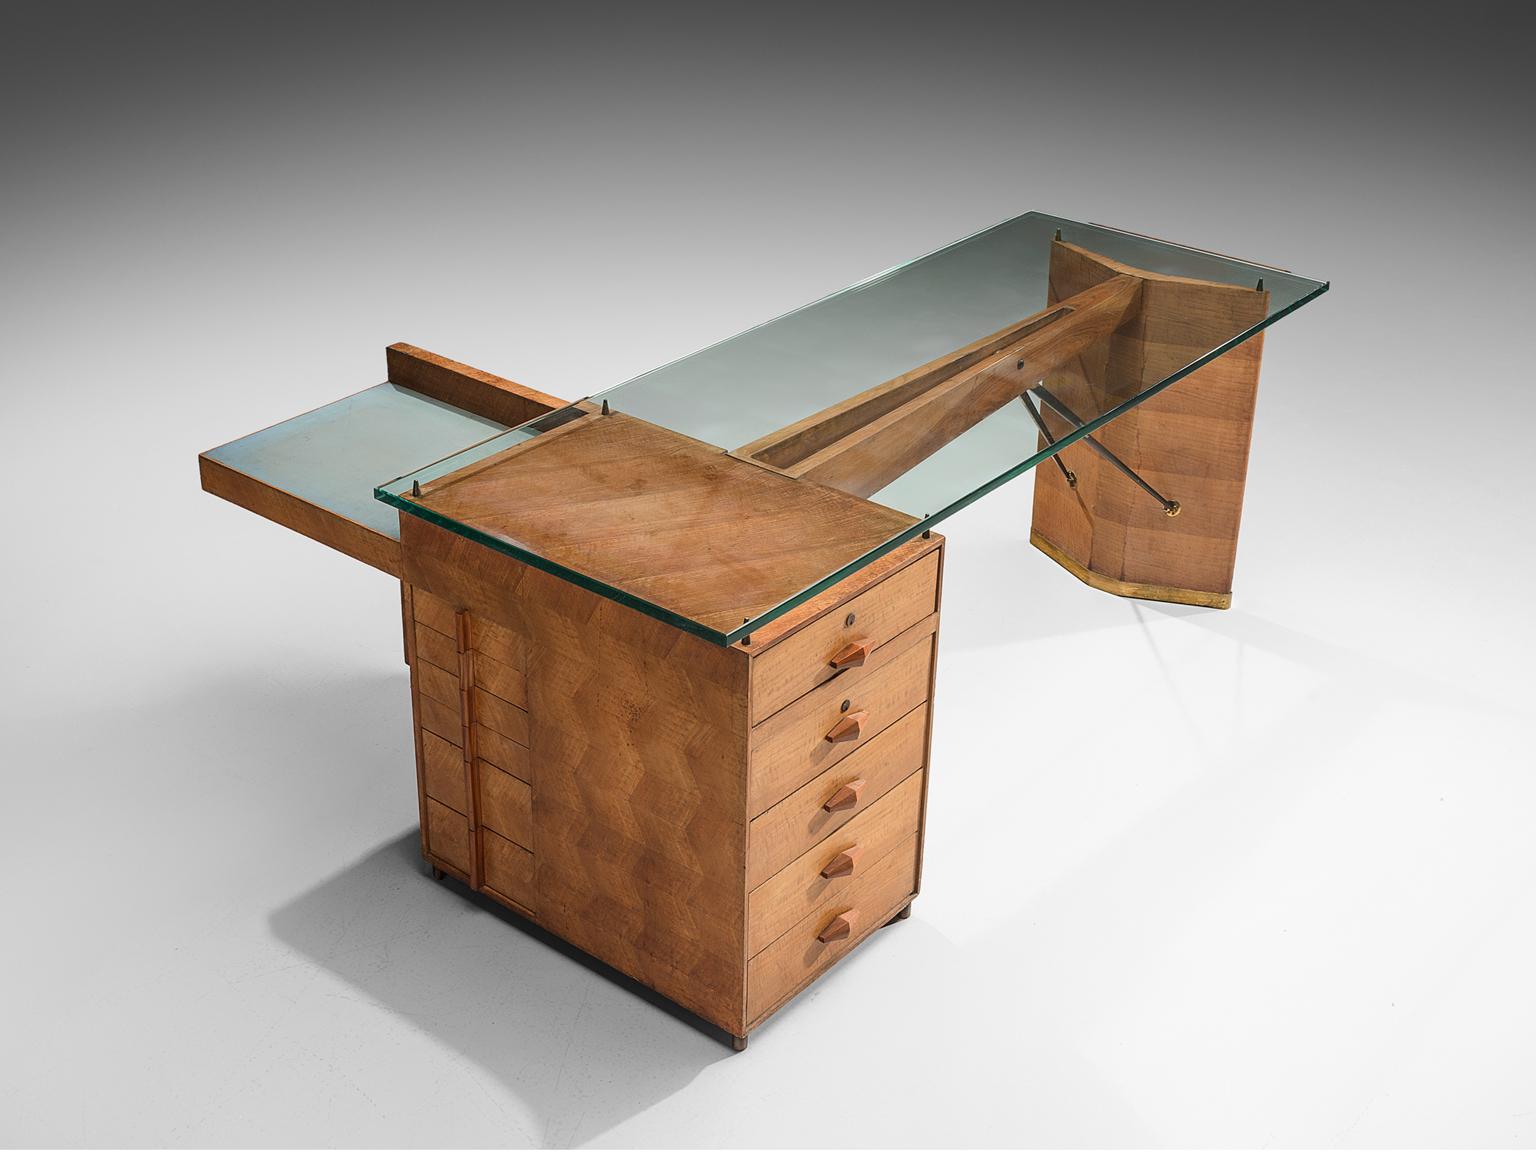 Mario Brunati, architectural desk with a wooden structure, thick glass top and brass details, Italy, circa 1940.

This exquisite geometric Rationalist desk is designed by Mario Brunati. There are many features within this desk that tell a story